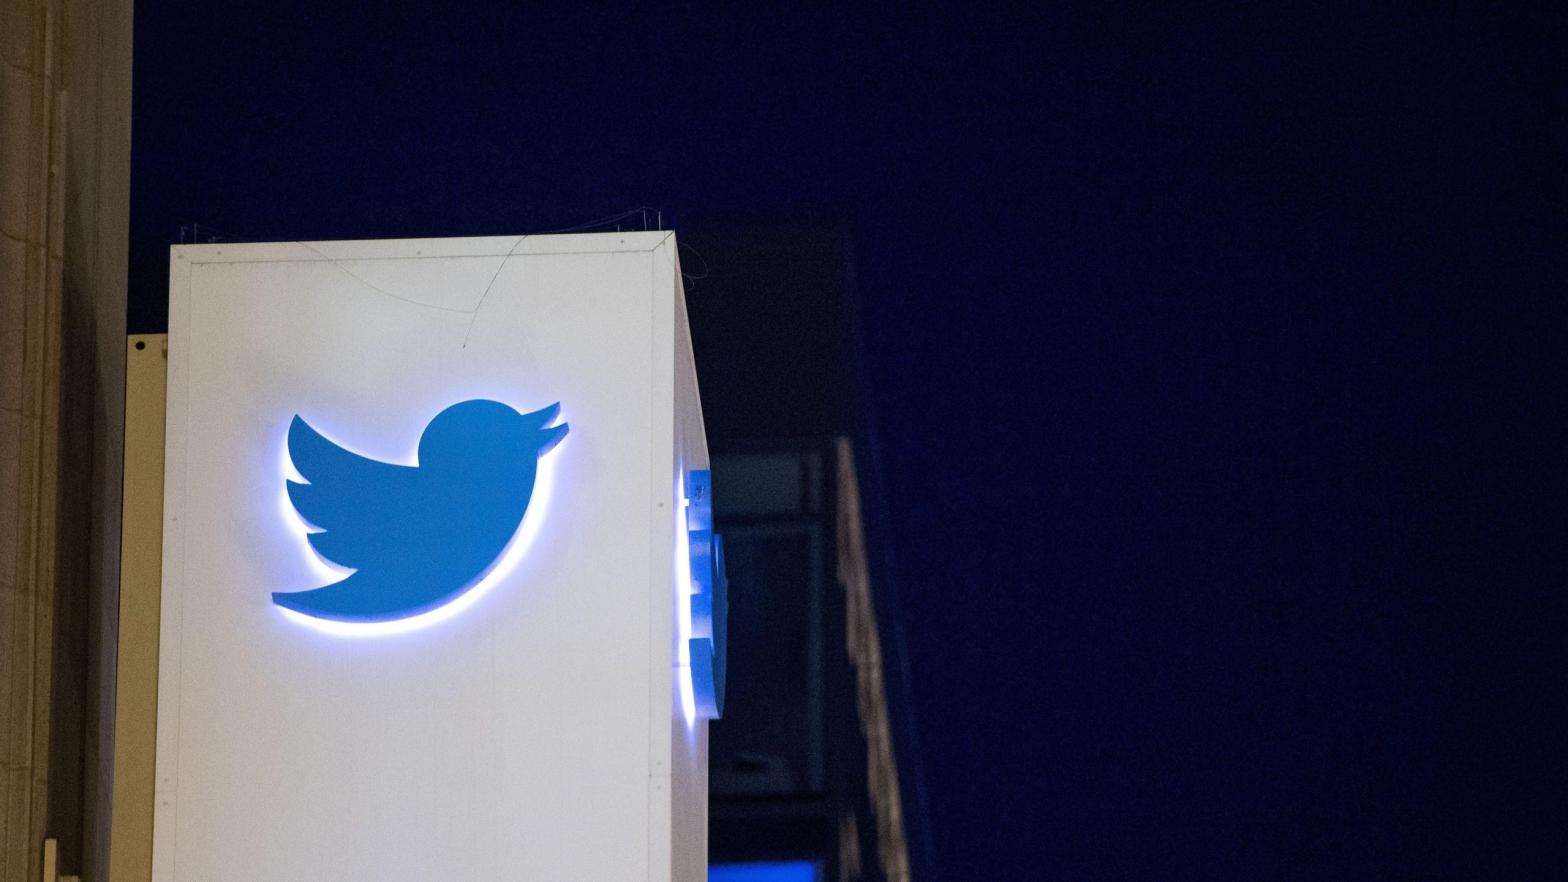 The Twitter logo is seen on a sign at the company's headquarters in San Francisco, California. (Photo: Josh Edelson / AFP, Getty Images)